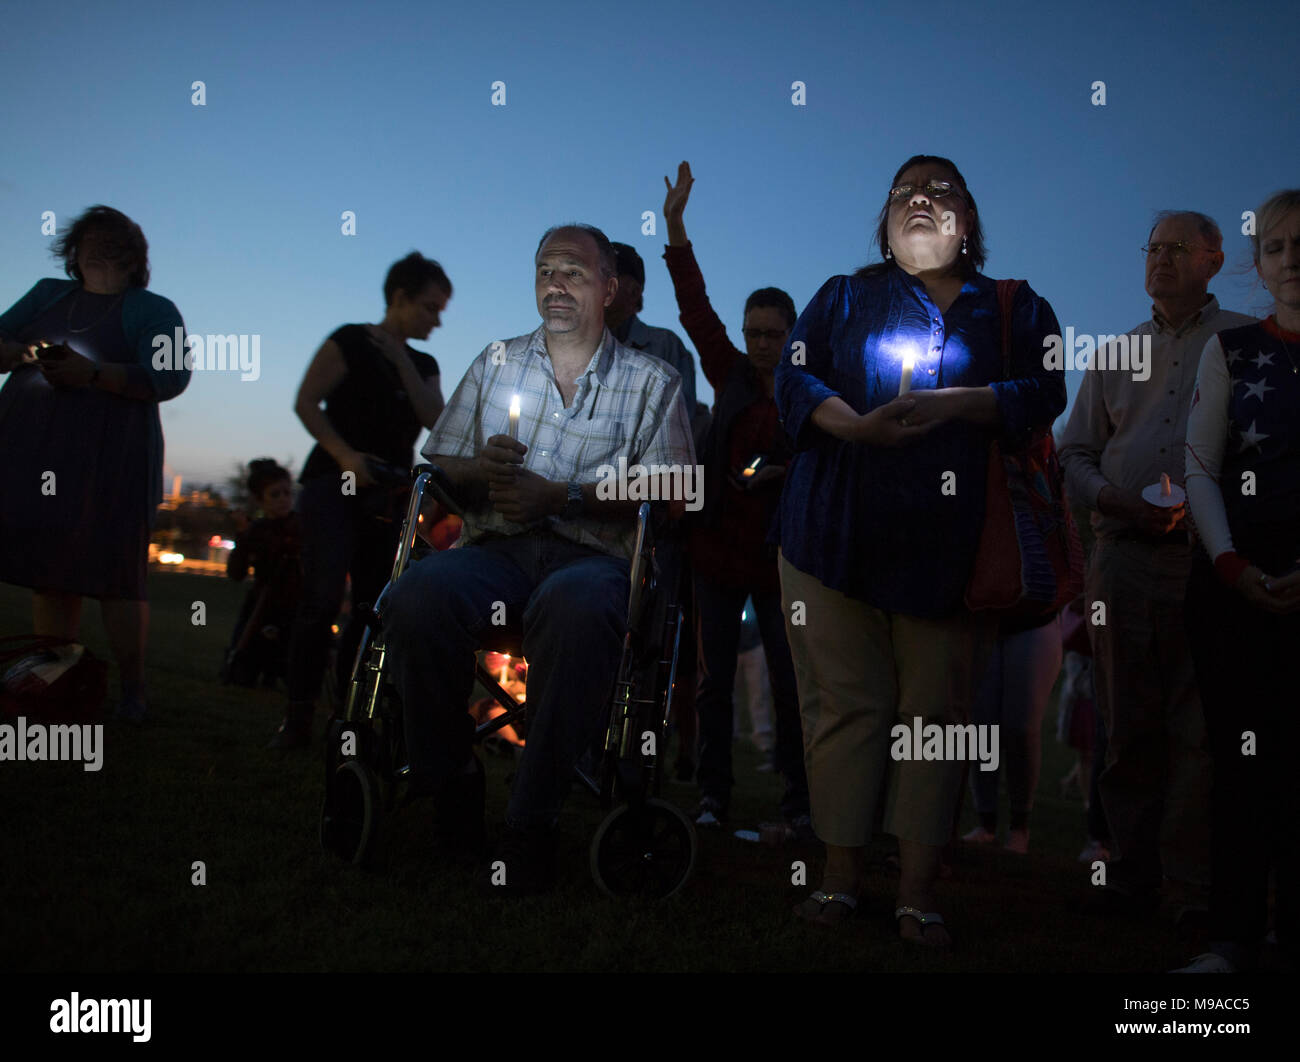 Mourners attend a candlelight vigil in Pflugerville, Texas, for the victims of recent Austin package bomb attacks, and to pray for the family of Mark A. Conditt, a resident accused of masterminding the attacks. Conditt killed himself on March 21 as police closed in on him. Stock Photo